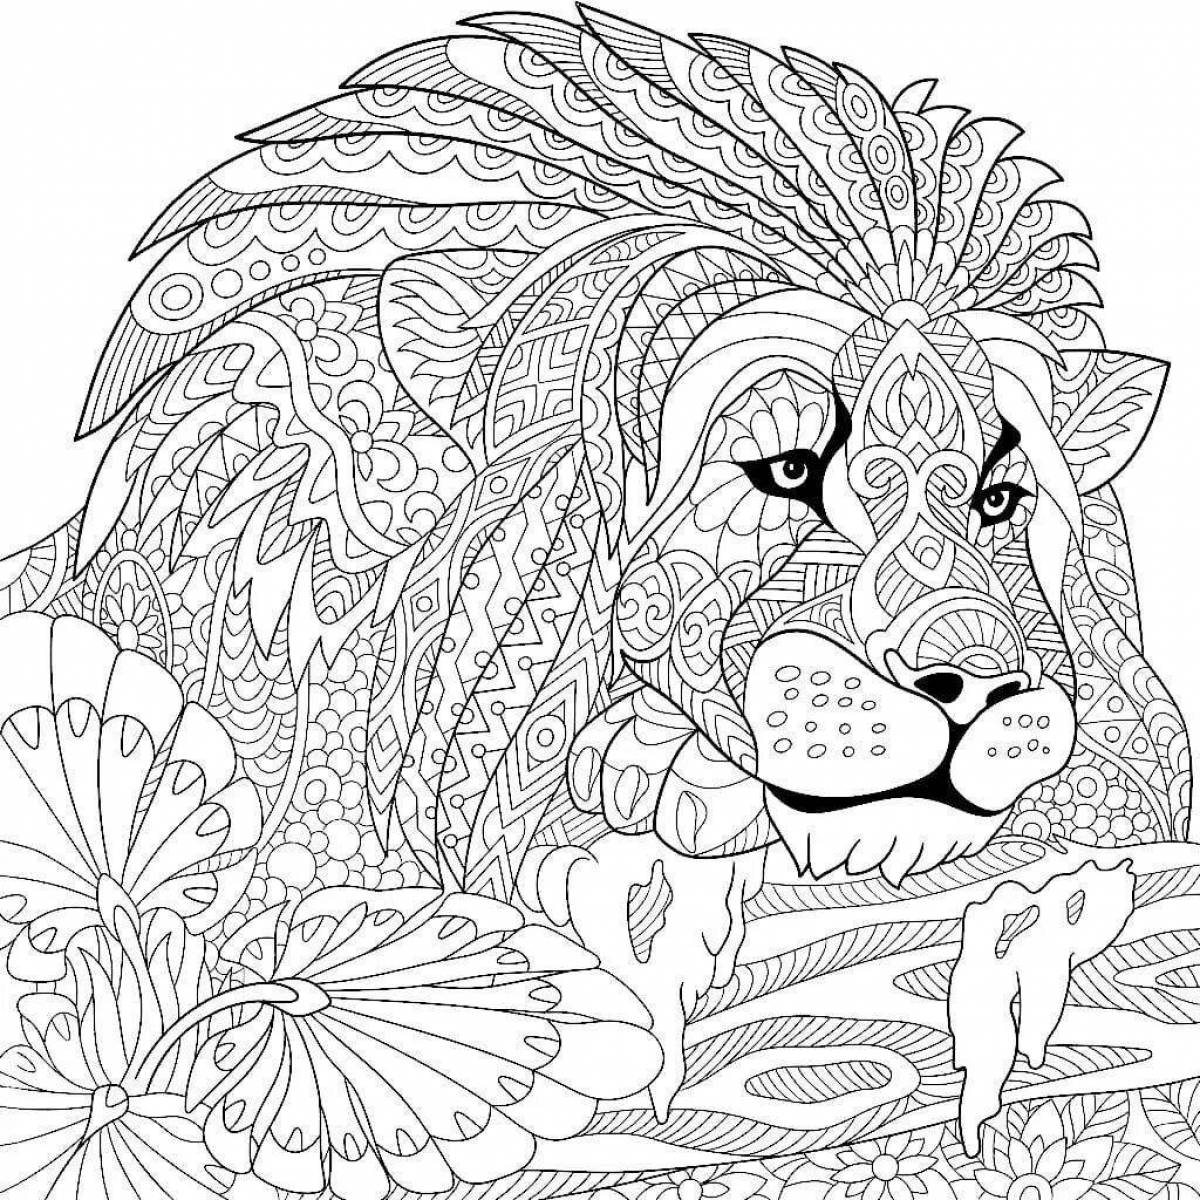 Peaceful coloring by numbers for adults ru antistress